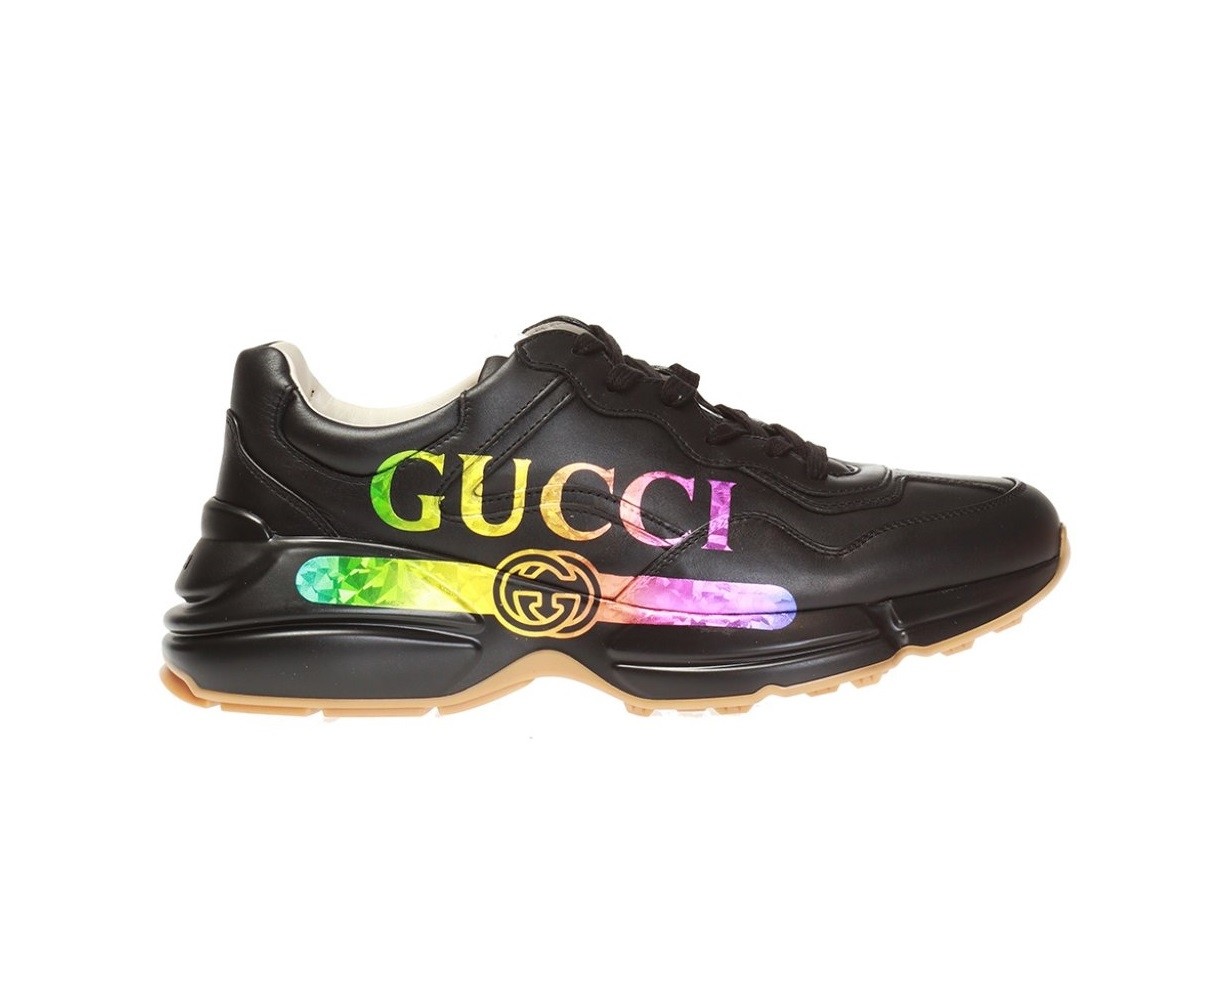 Gucci Rhyton Leather Sneaker With Gucci Logo 552851 DRW00 1000